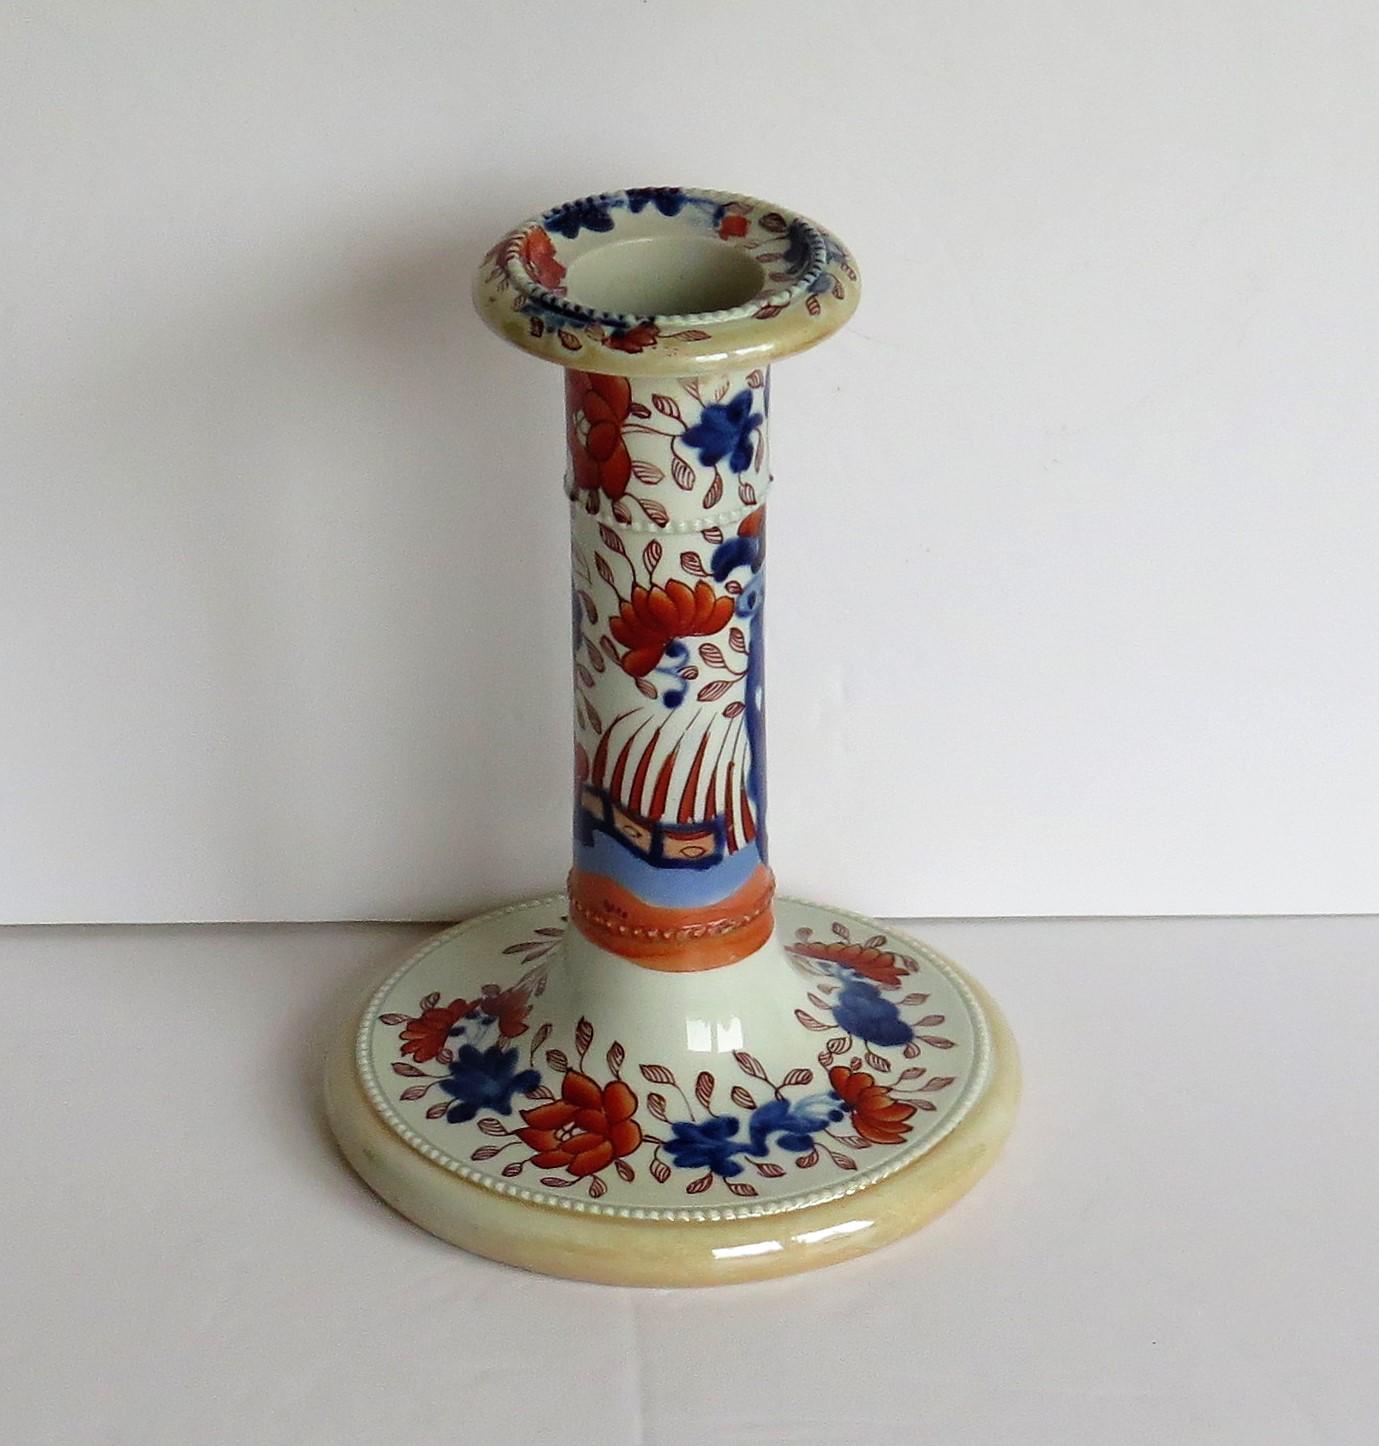 This is a rare and decorative Ironstone pottery candlestick, hand painted in the Fence Japan pattern and made by the Mason's factory at Lane Delph, Staffordshire, England, circa 1820.

Mason's ironstone Candlesticks are rare items.

The candlestick